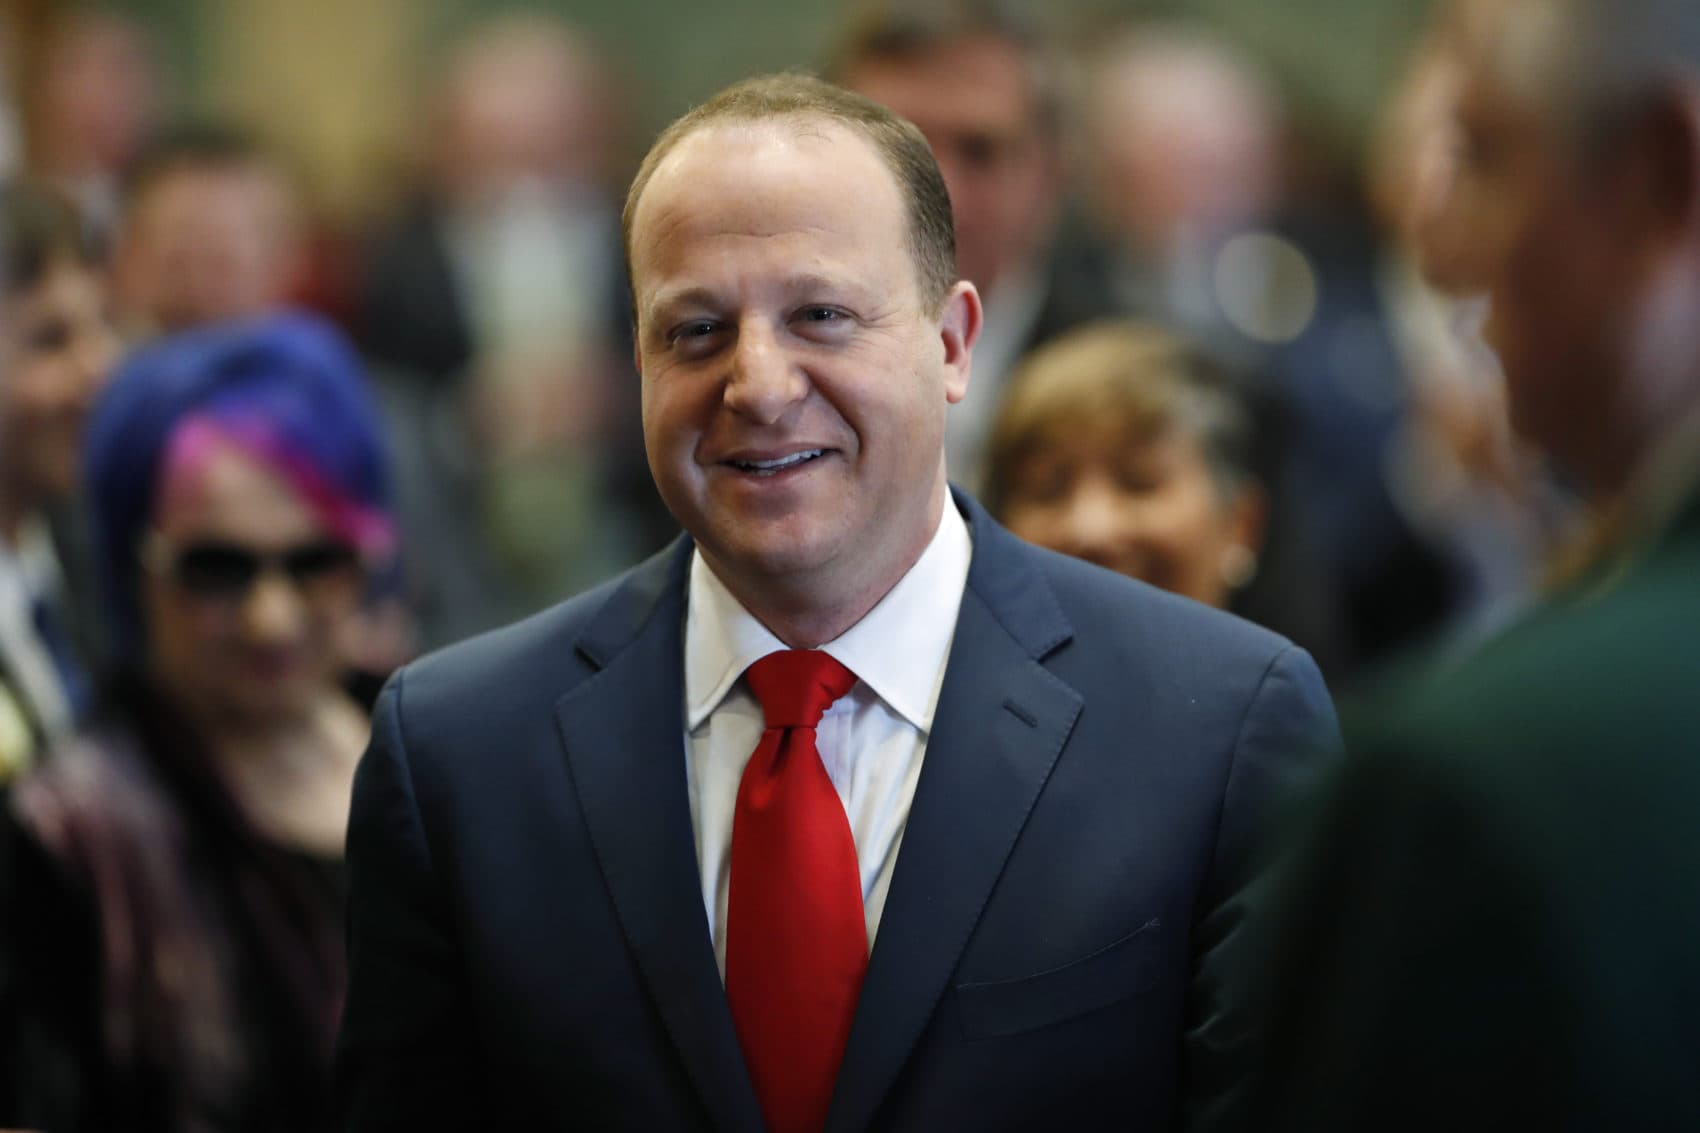 Colorado Gov. Jared Polis, Nation's 1st Openly Gay Elected